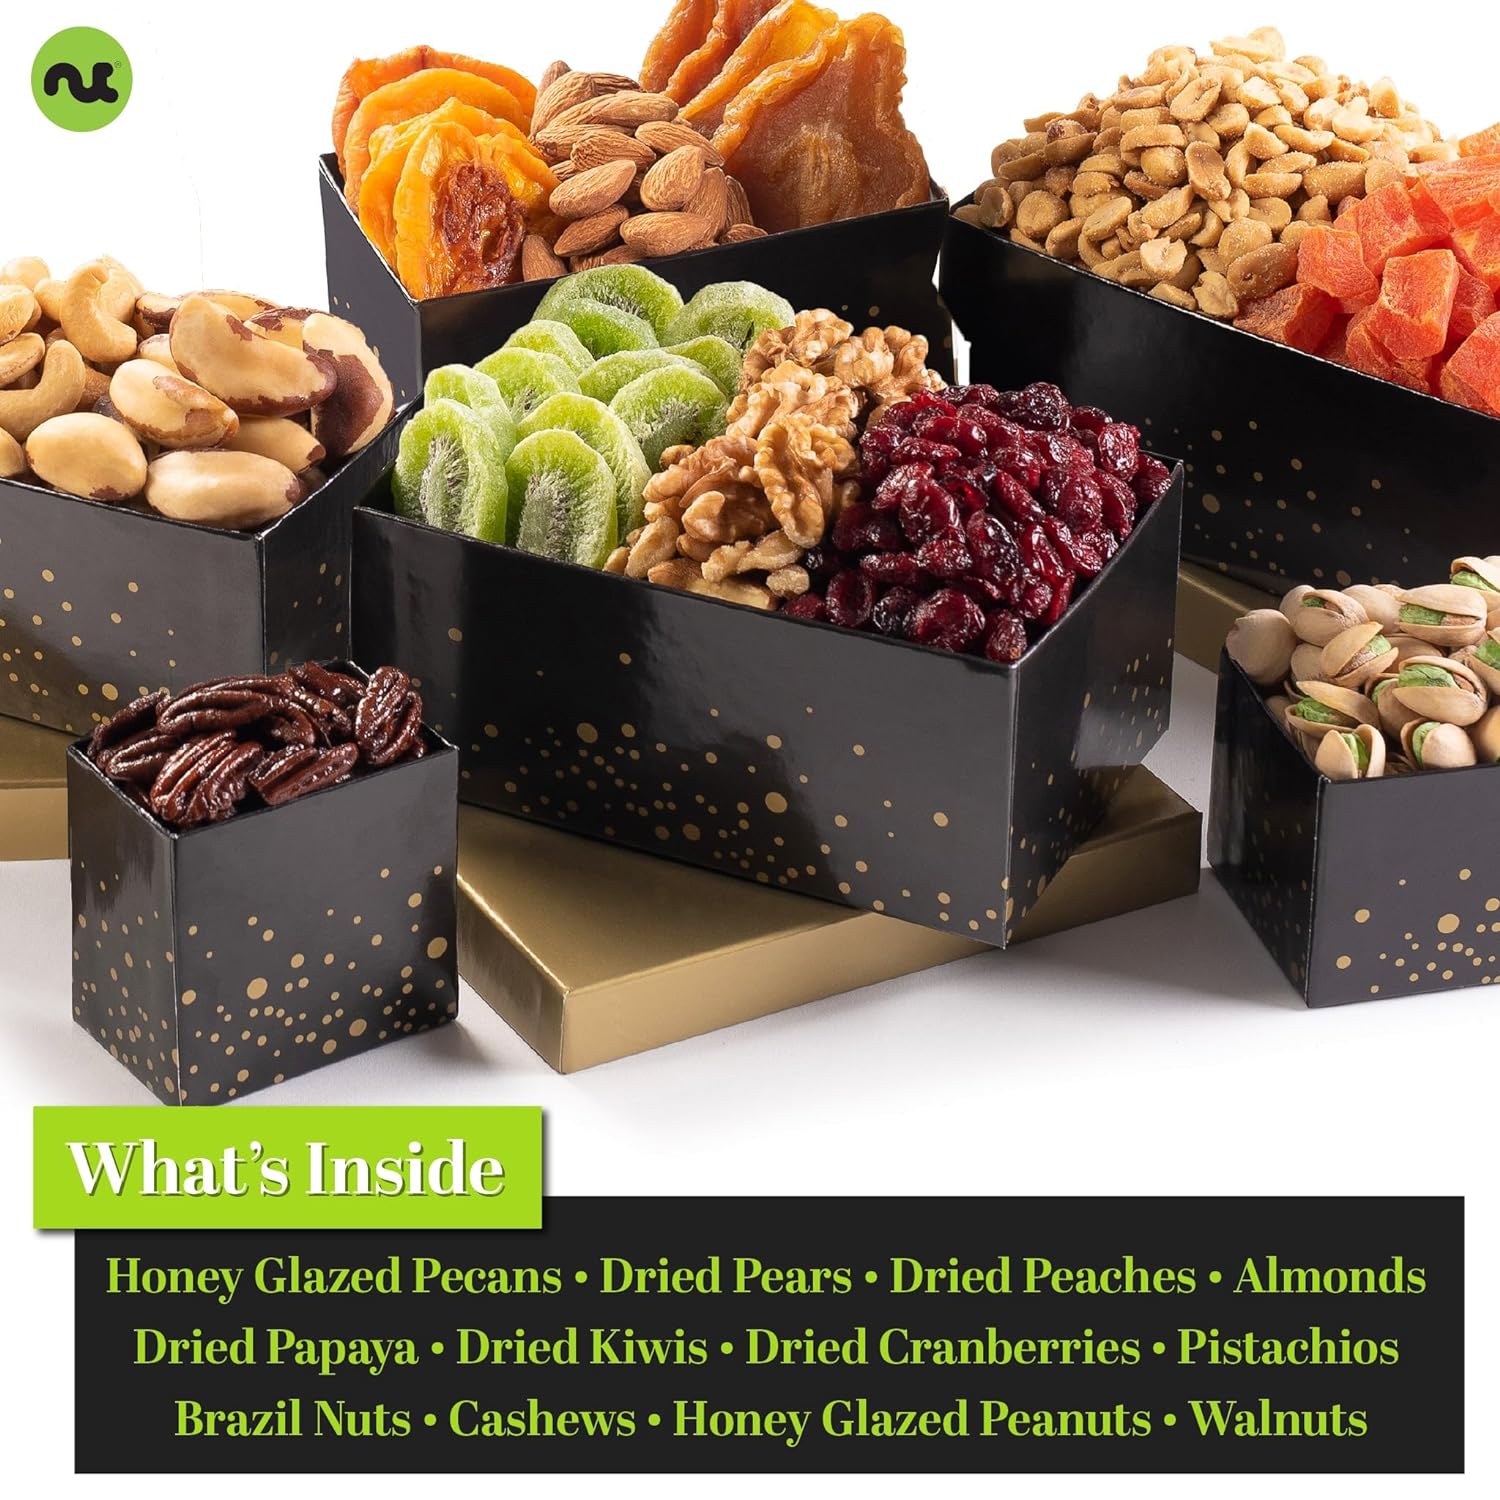 Nut Cravings Gourmet Collection - Mothers Day Dried Fruit & Mixed Nuts Gift Basket Black Tower + Ribbon (12 Assortments) Arrangement Platter, Birthday Care Package - Healthy Kosher : Grocery & Gourmet Food